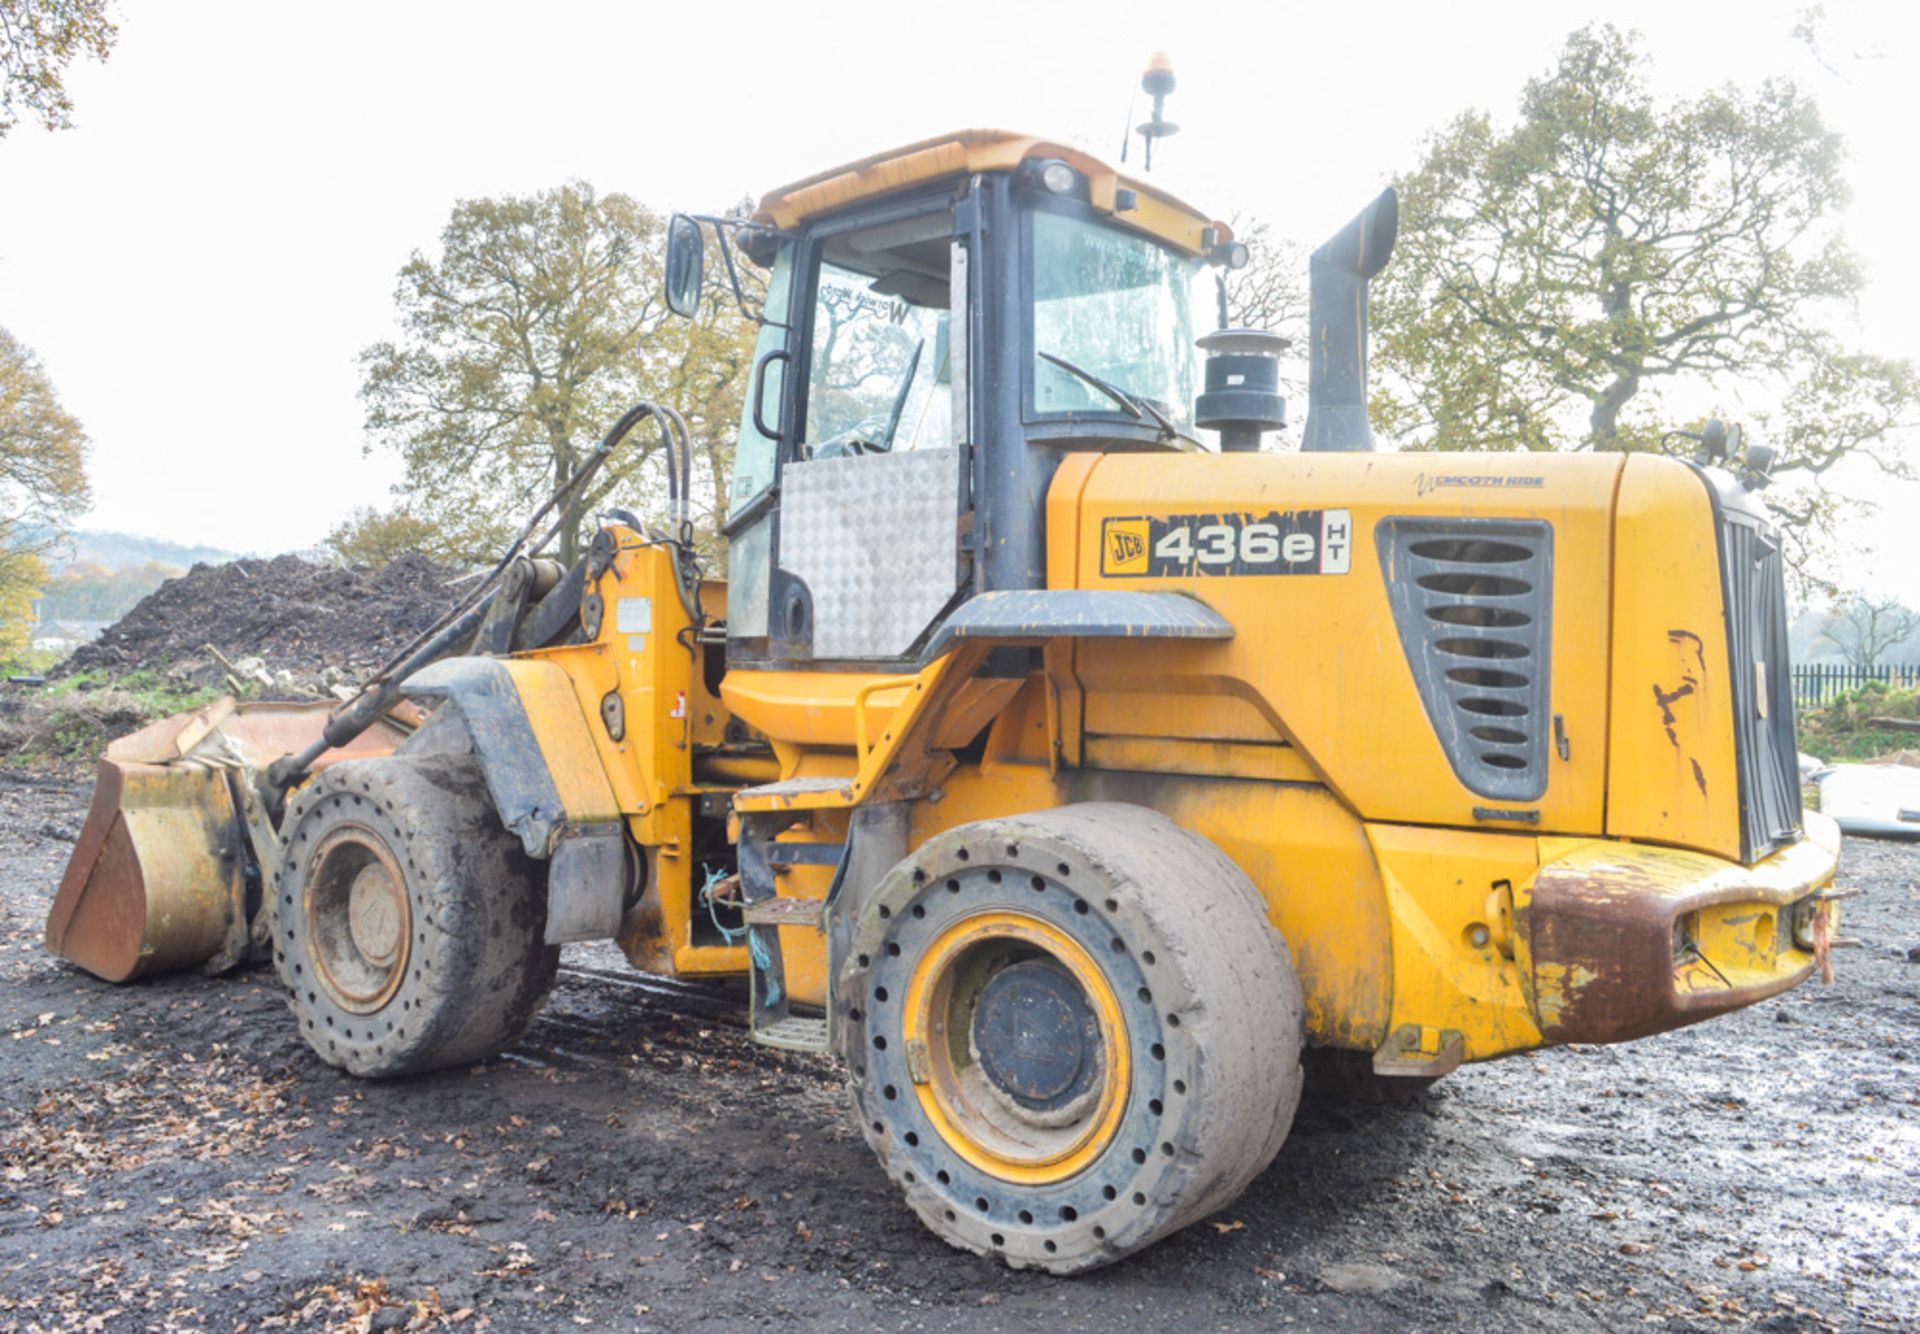 JCB 436E HT loading shovel Year: 2007 S/N: 1410067 Recorded Hours: 12,212 ** Sold as a non runner - Image 2 of 10